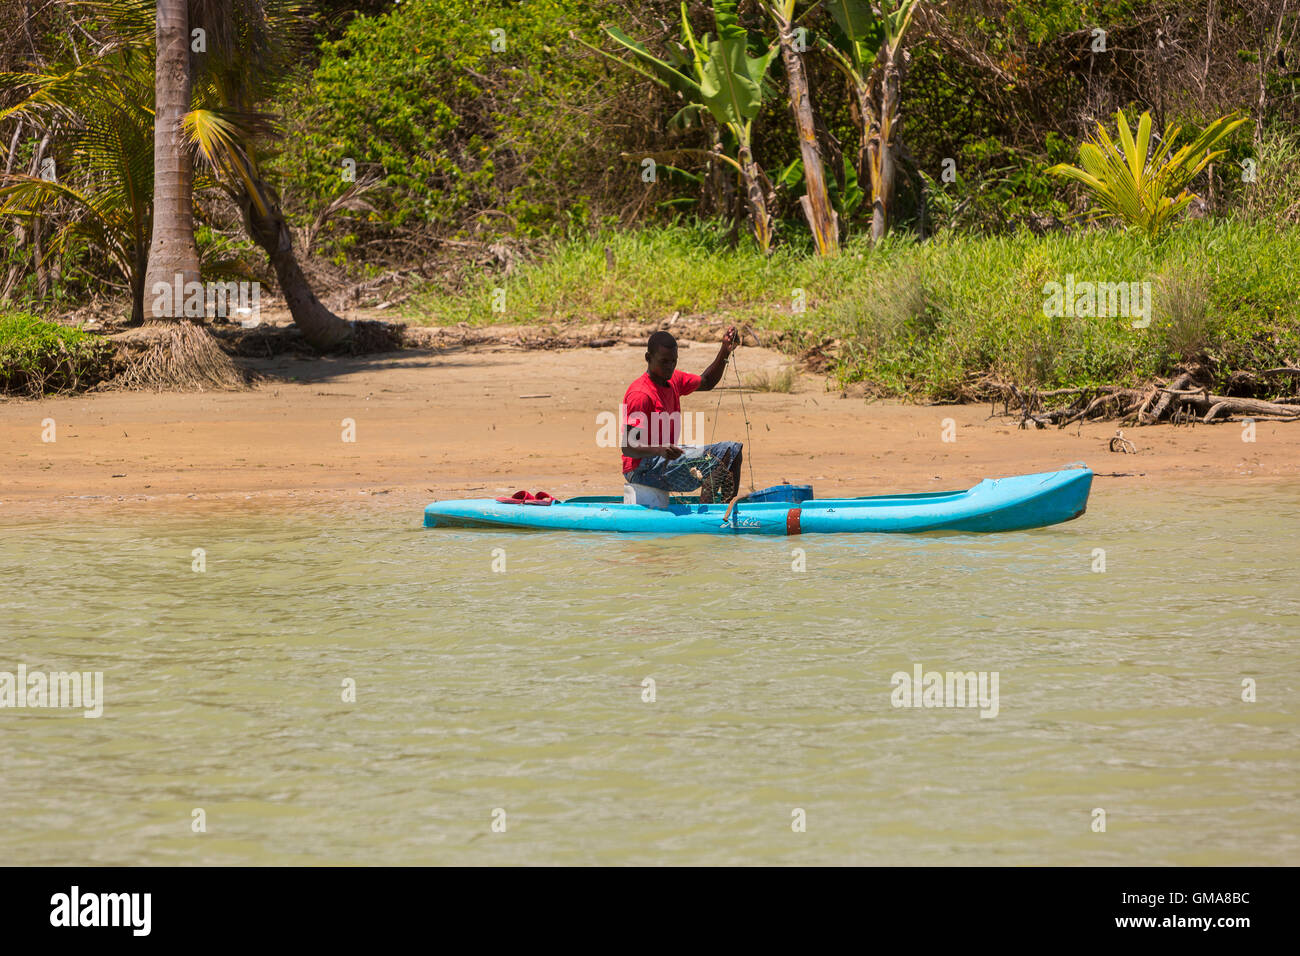 CABARETE, DOMINICAN REPUBLIC - Man in small boat fishing for blue crabs, at mouth of Yasica River. Stock Photo